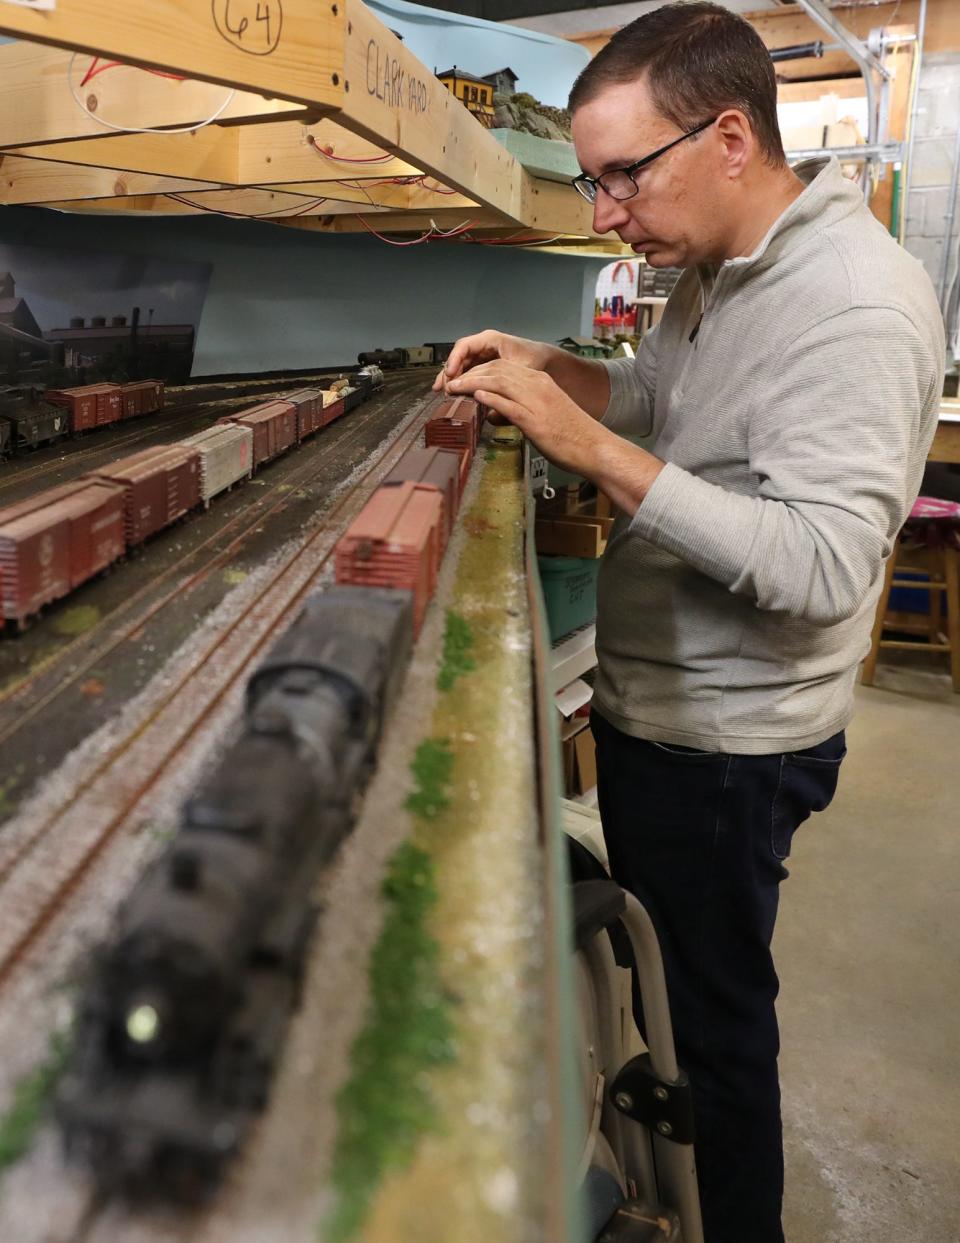 Matthew Albright of the Cuyahoga Valley Terminal Model Railroad Club adjusts a train that had derailed. The club looking for a home for their railroad.